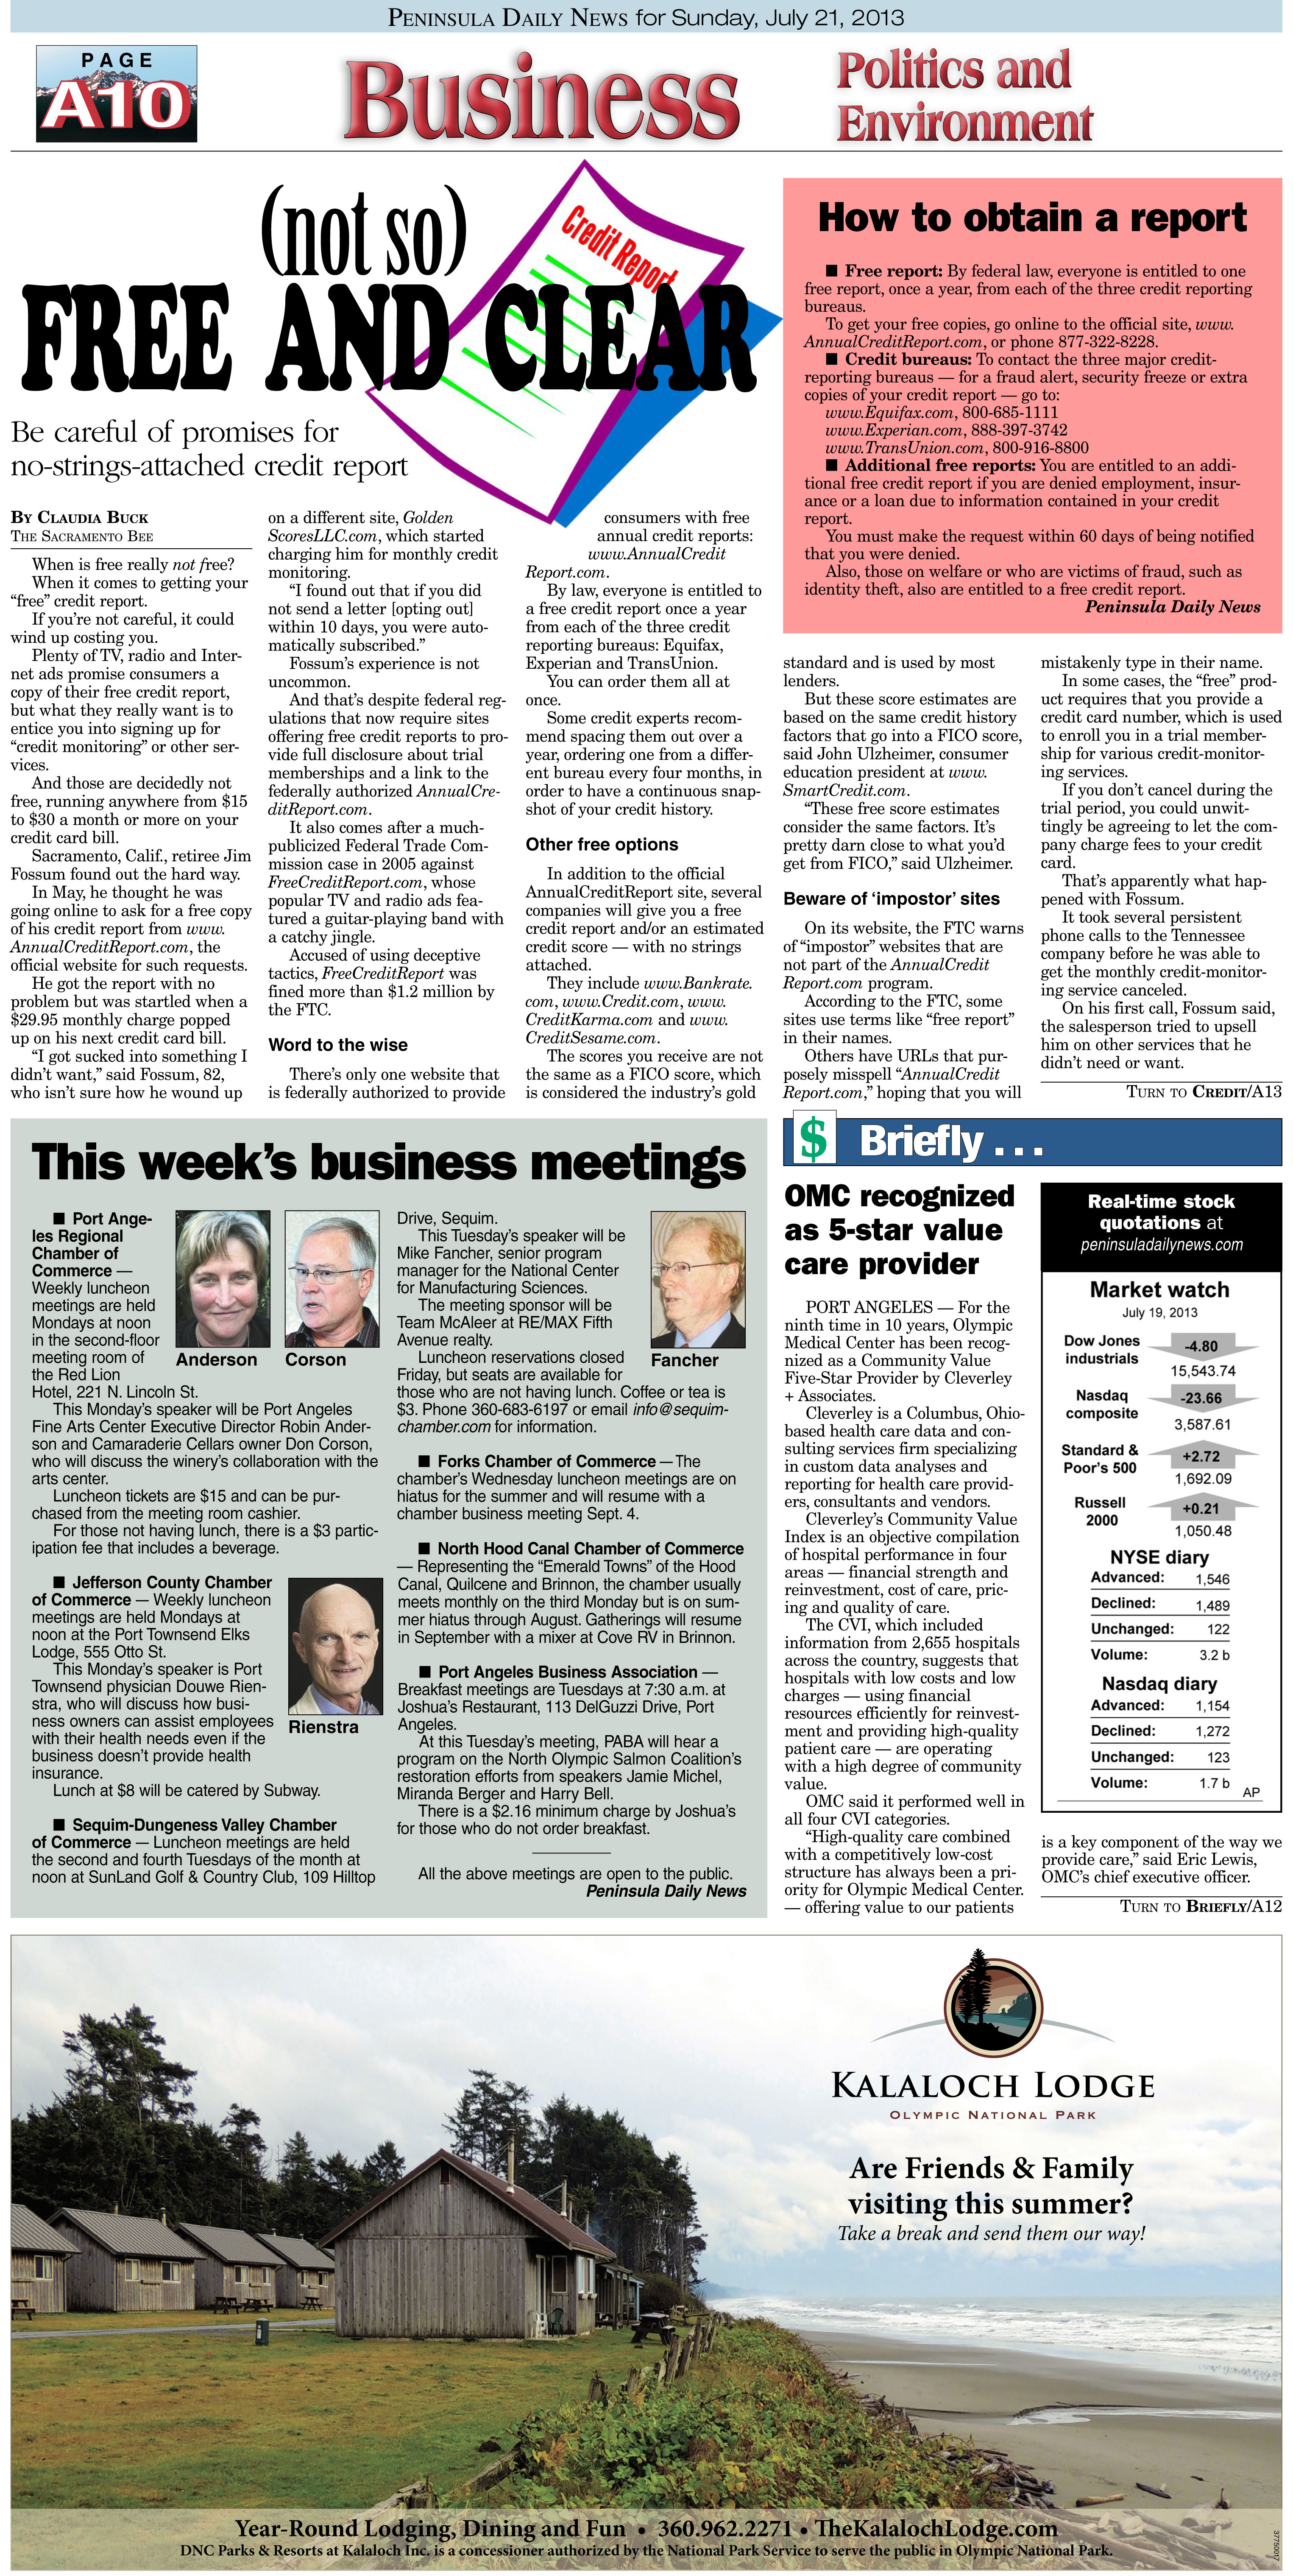 This week's North Olympic Peninsula business meetings . . . and other business briefs